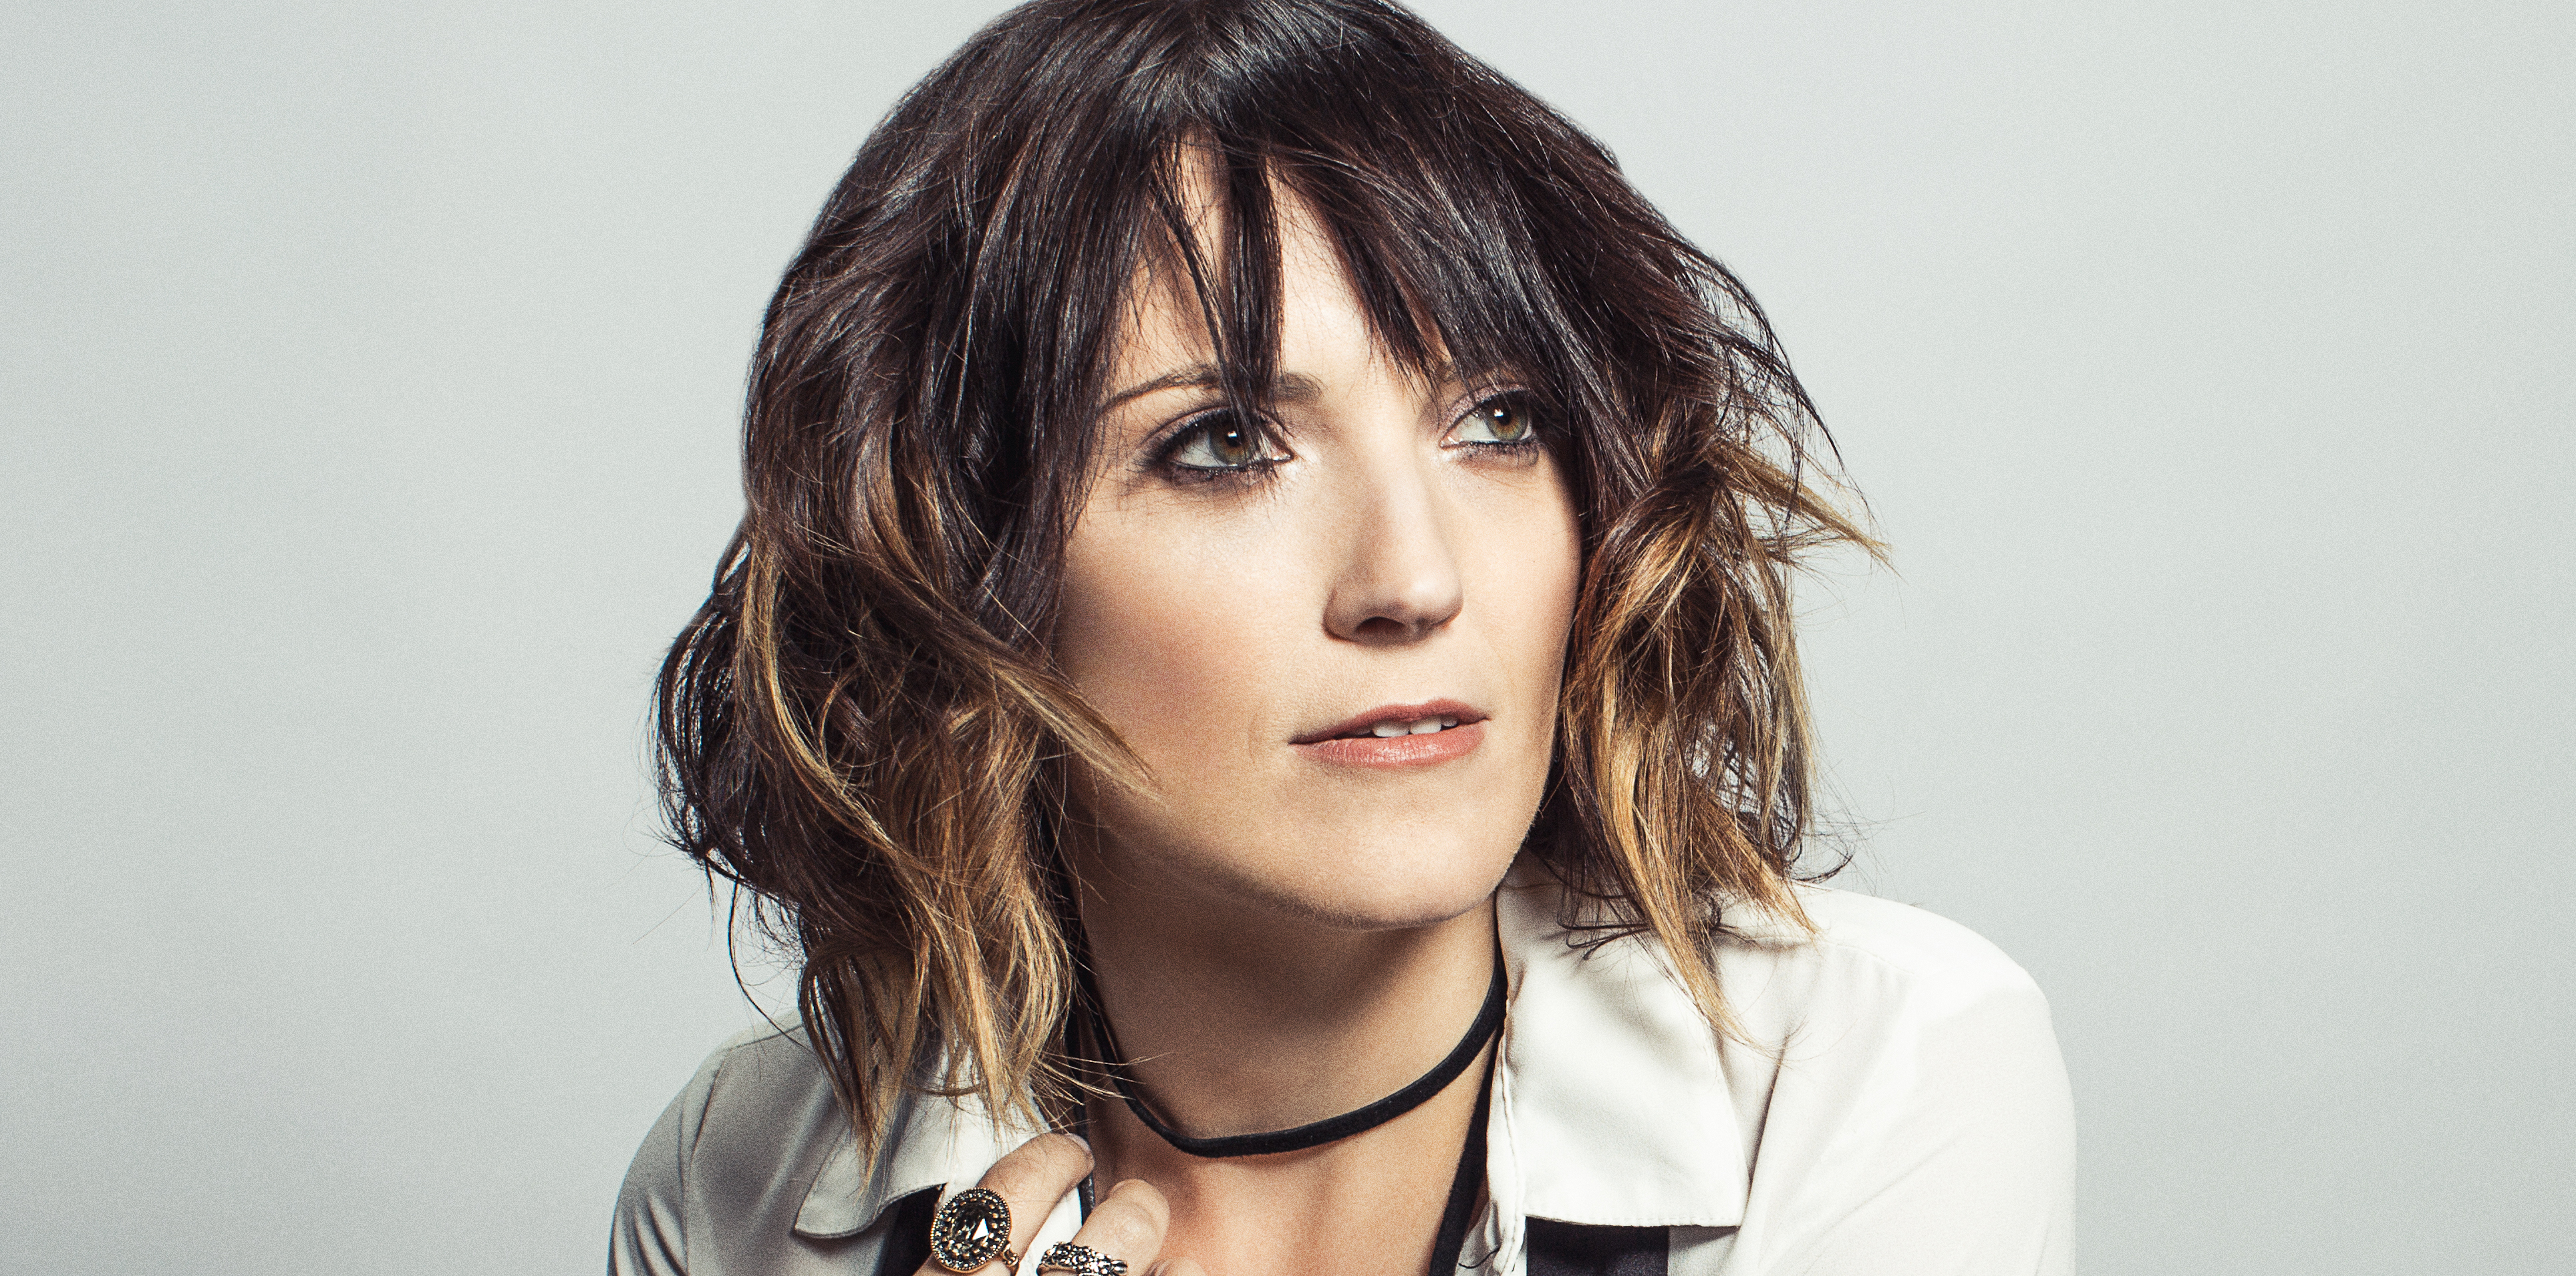 US COMEDIAN, AUTHOR, AND PODCASTER JEN KIRKMAN ANNOUNCES SPECIAL SHOW AT LEICESTER SQUARE THEATRE ON 22nd JUNE